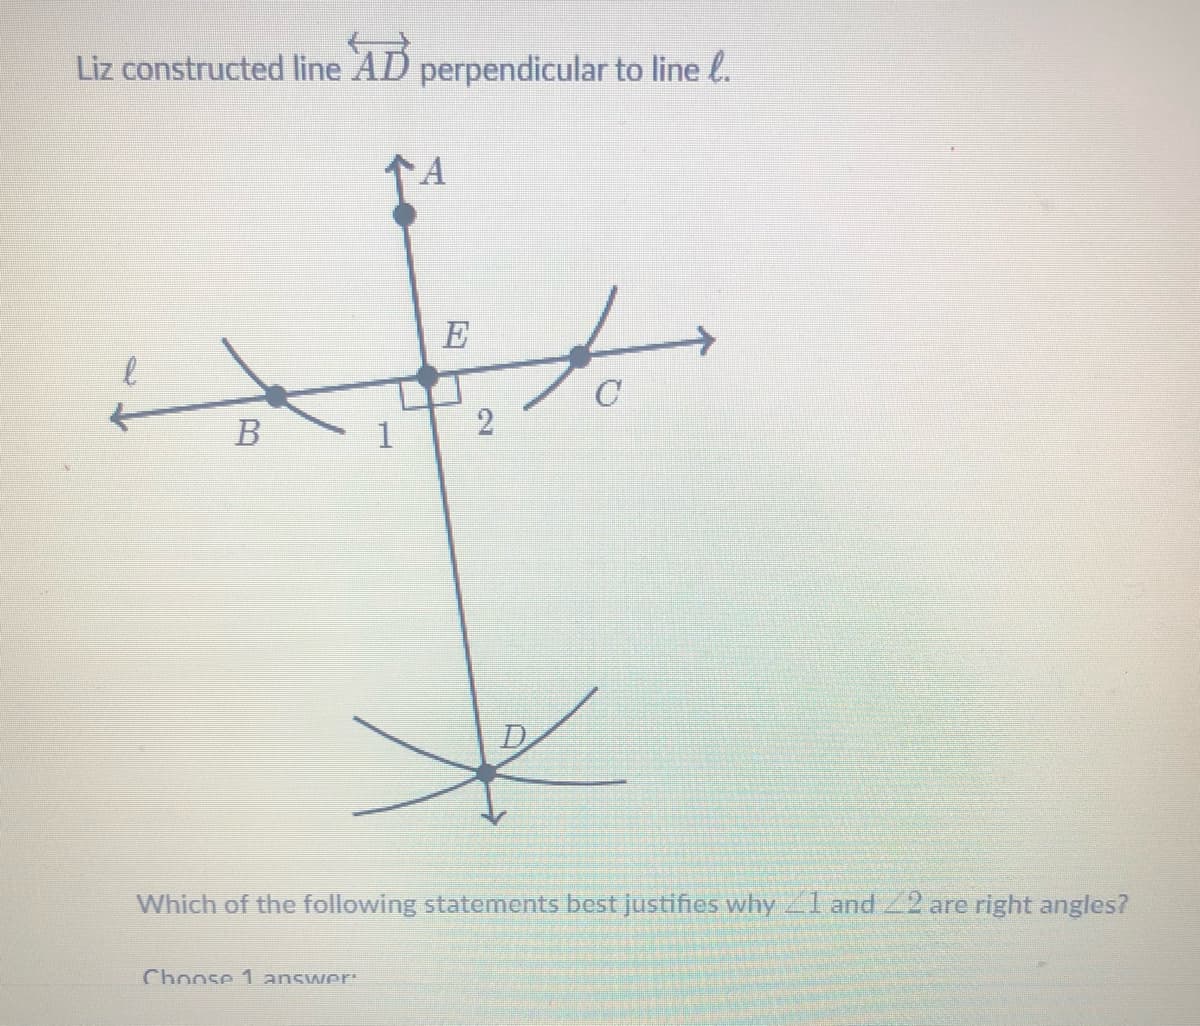 Liz constructed line AD perpendicular to line l.
A
E
B
1
Which of the following statements best justifies why 1 and 2 are right angles?
Choose 1 answer:
